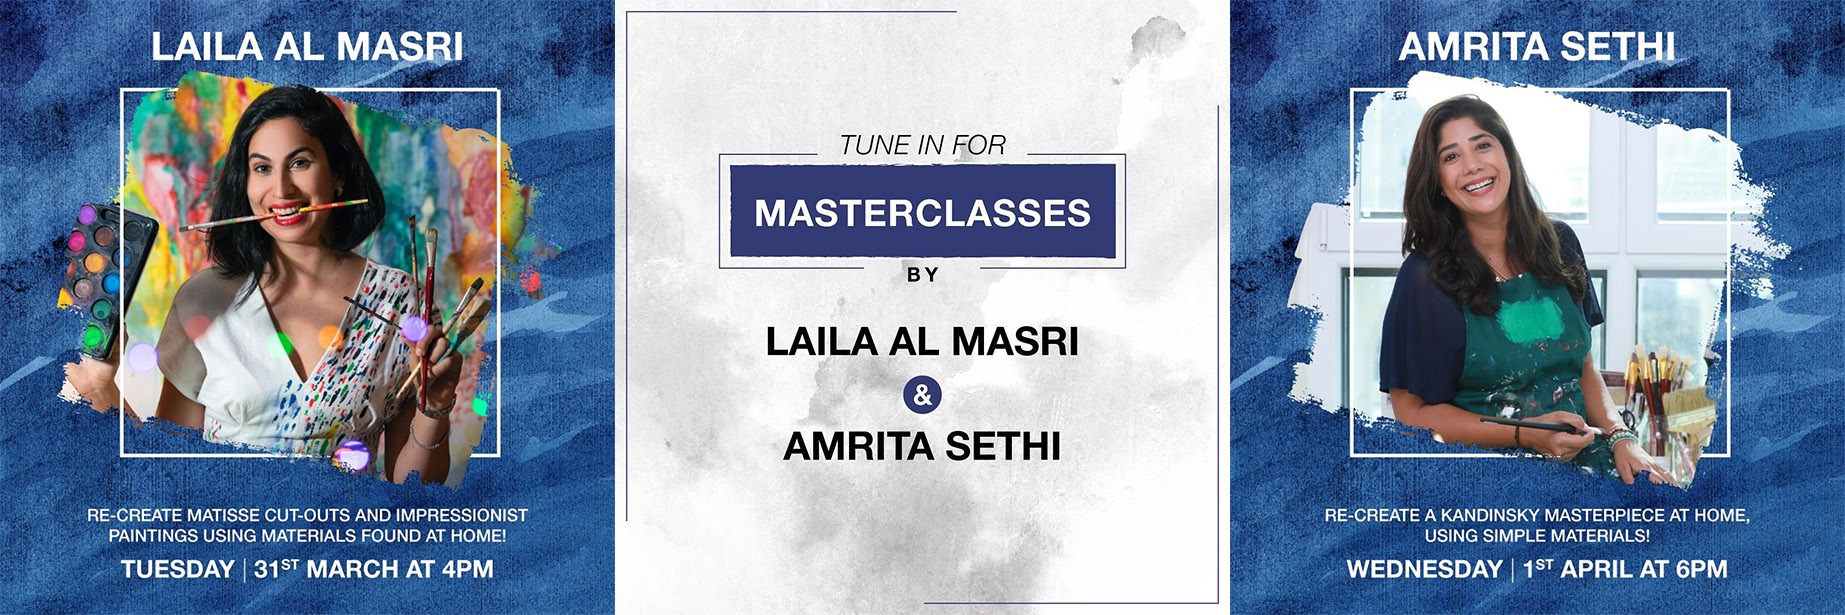 Free online painting classes with Laila Al Masri and Amrita Sethi - Coming Soon in UAE